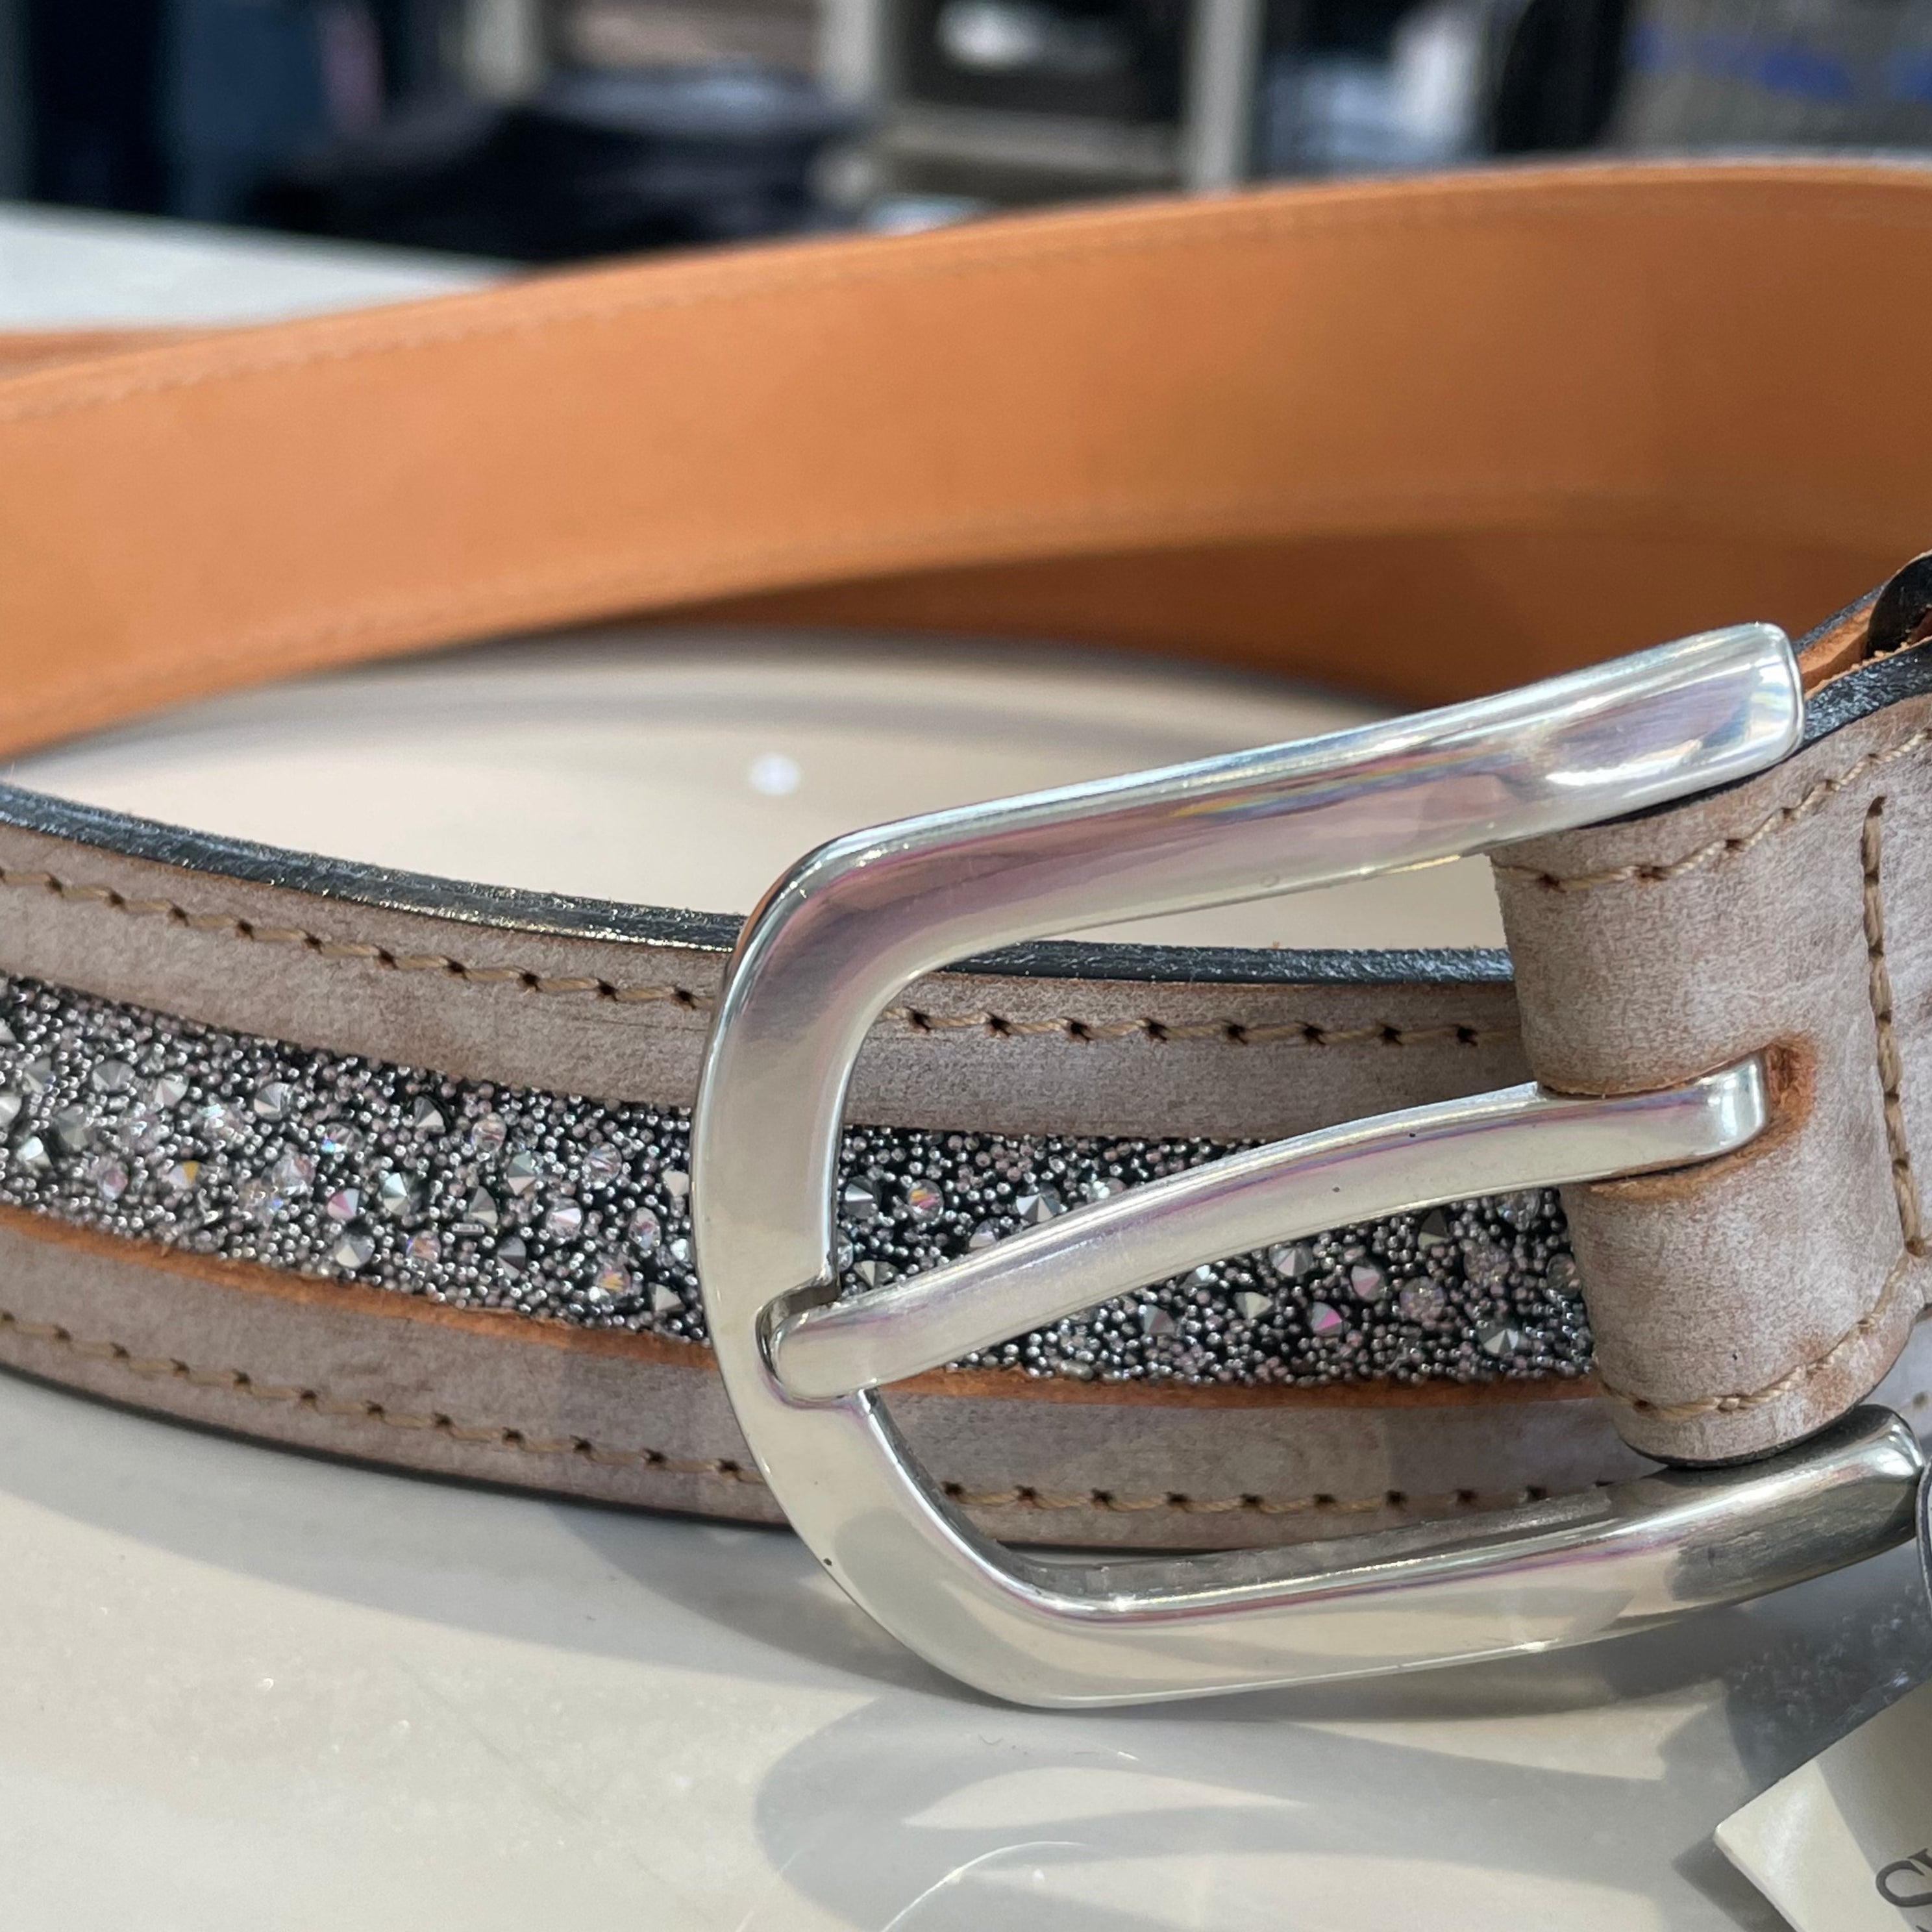 Otto Schumacher Taupe fine medley crystal Belt 85cm- in stock and ready to wear!